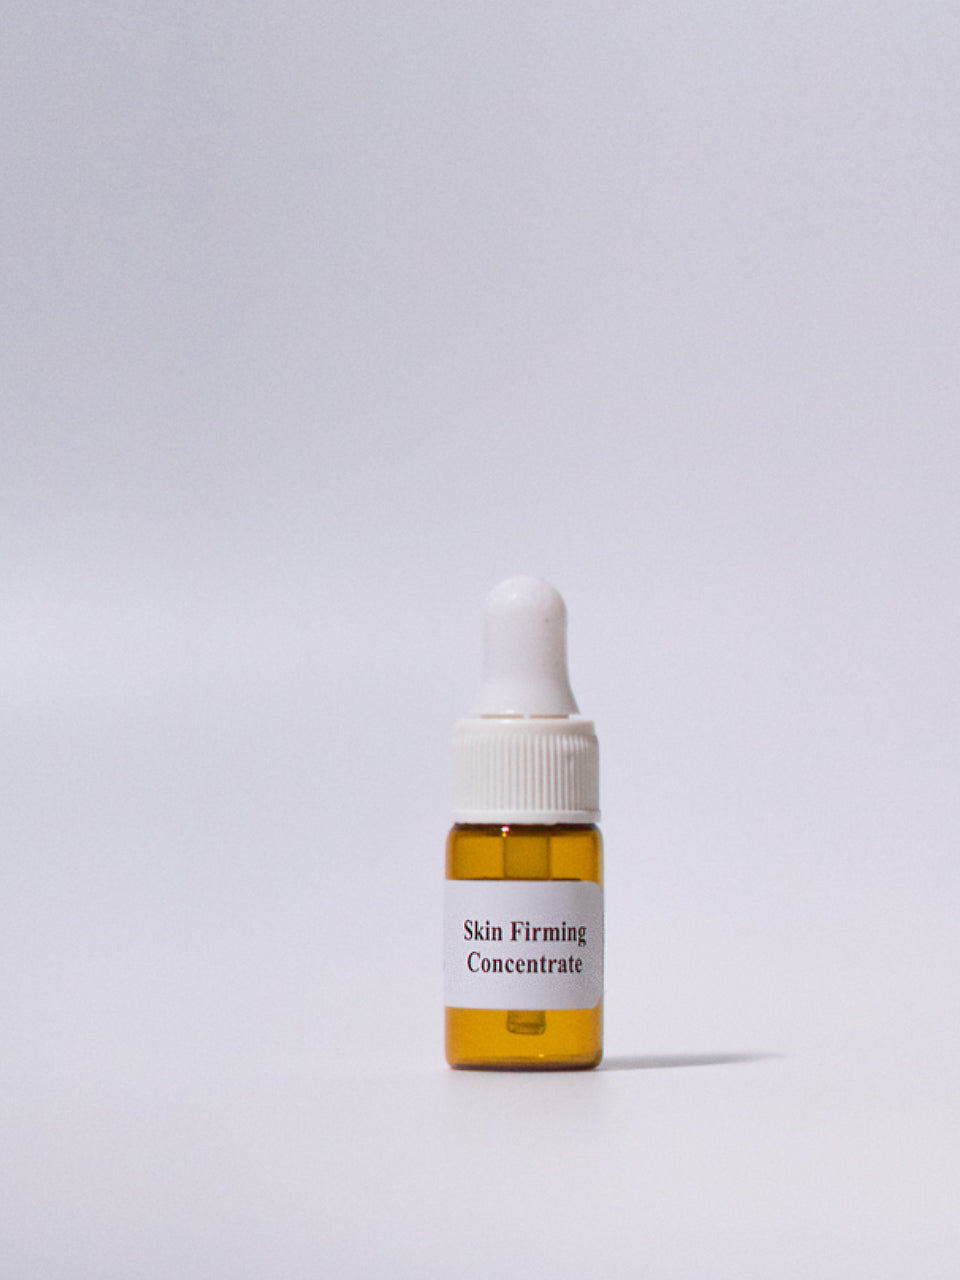 Skin Firming Concentrate Sample (3g)